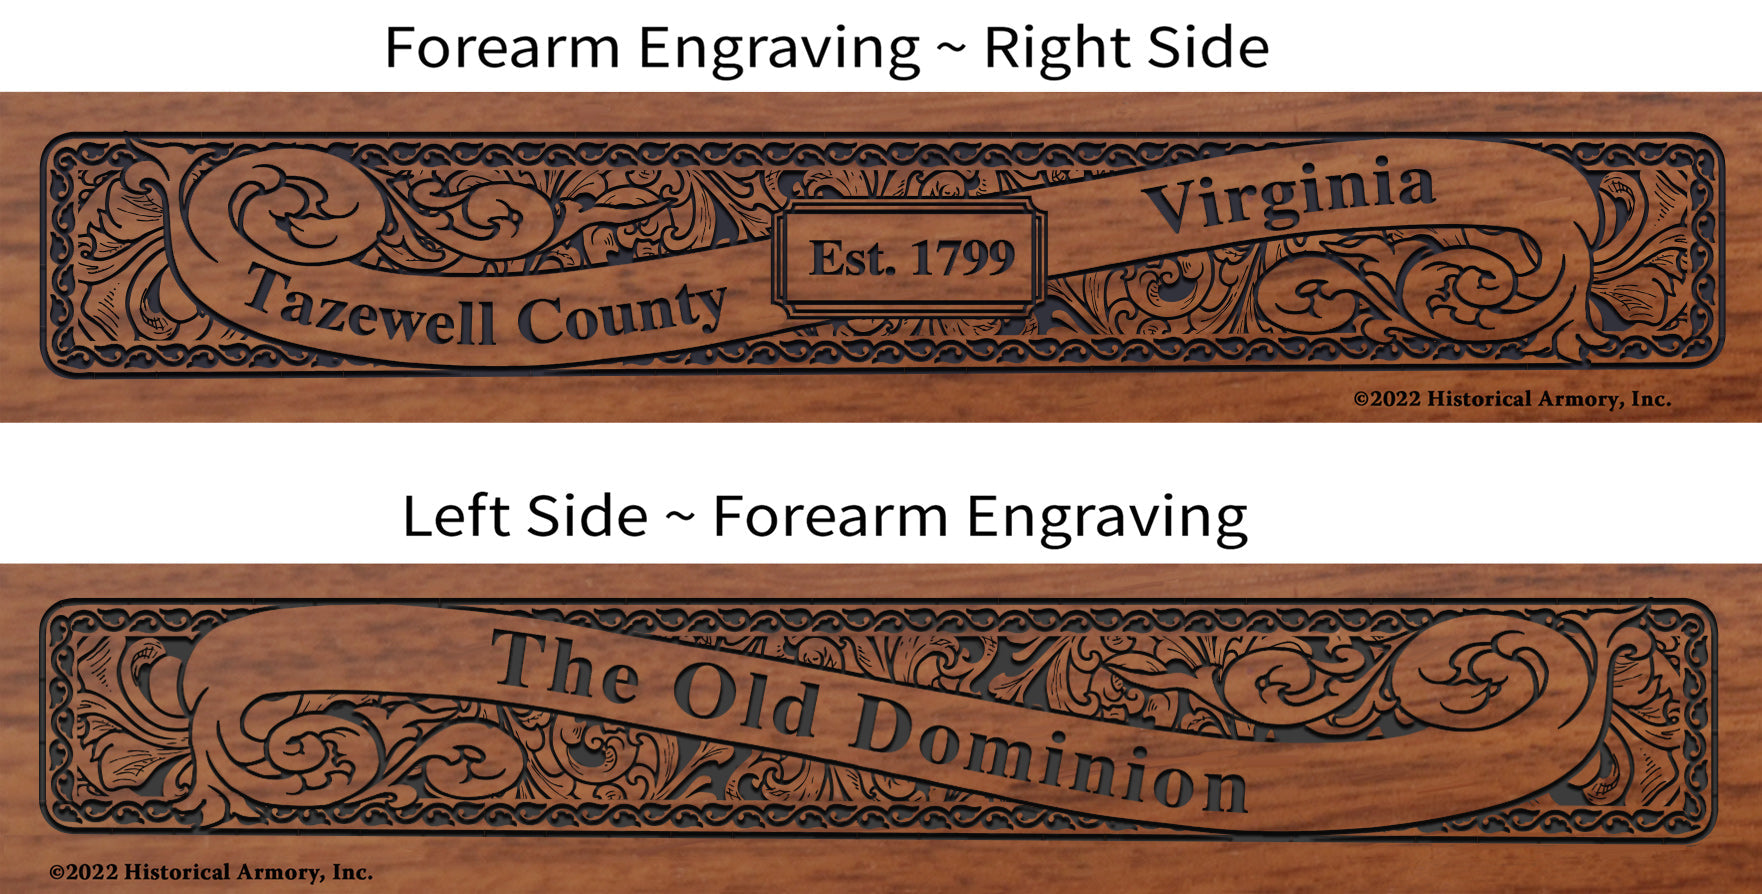 Tazewell County Virginia Engraved Rifle Forearm